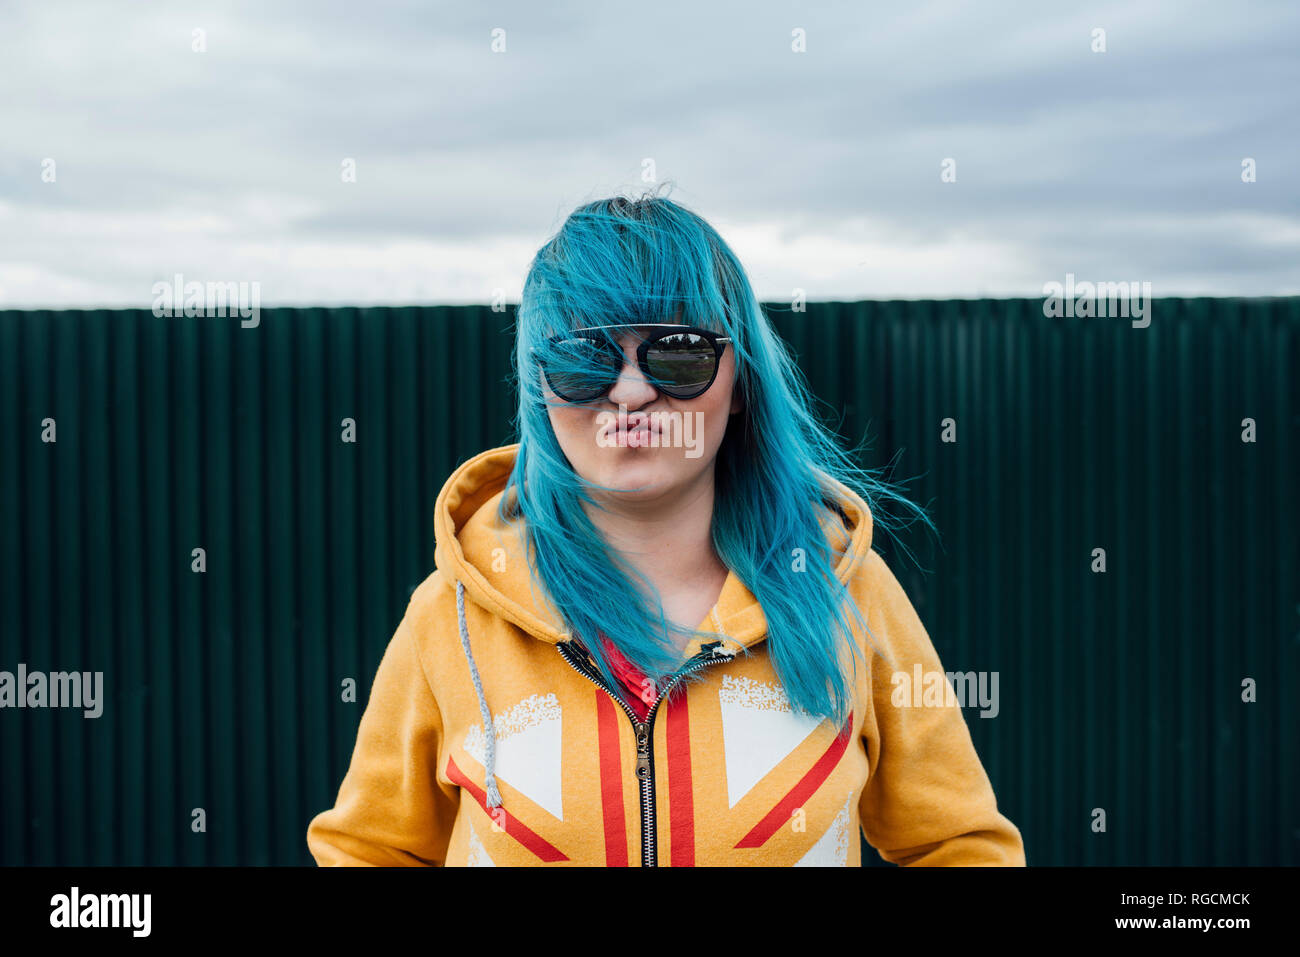 Portrait of young woman with dyed blue hair wearing sunglasses and hooded jacket Stock Photo